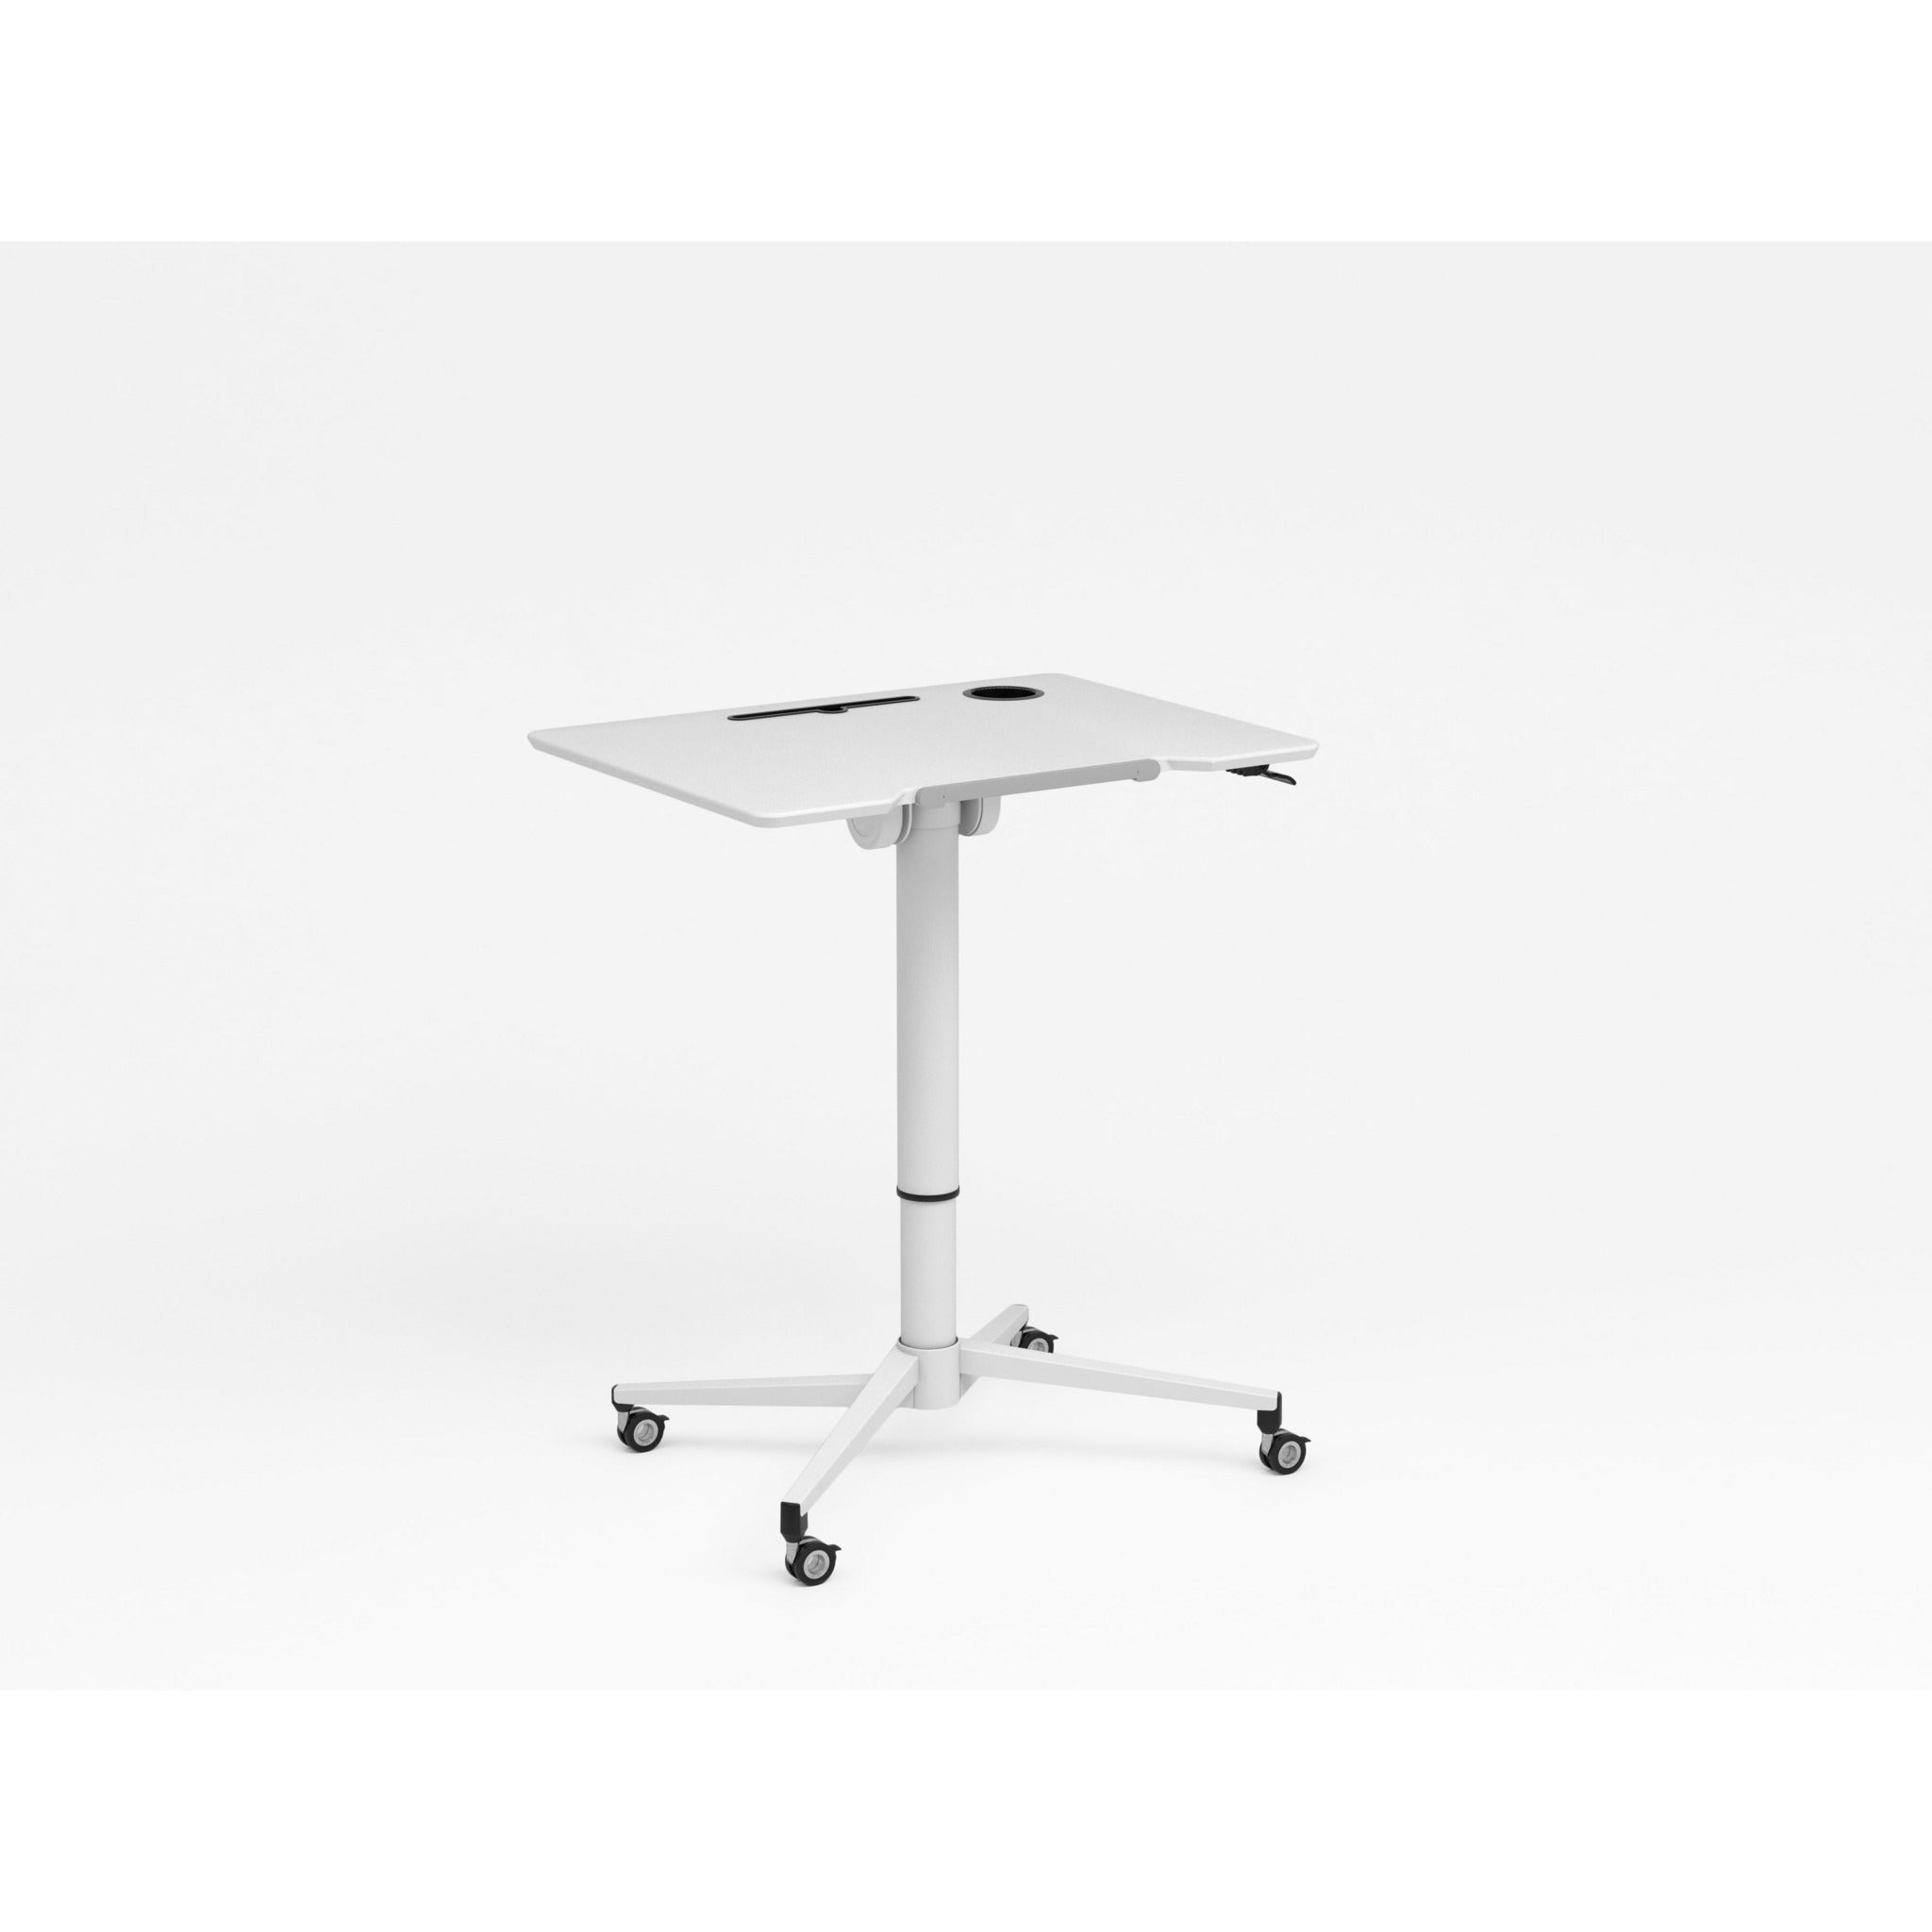 Sedeo Portable Height Adjustable Folding Table